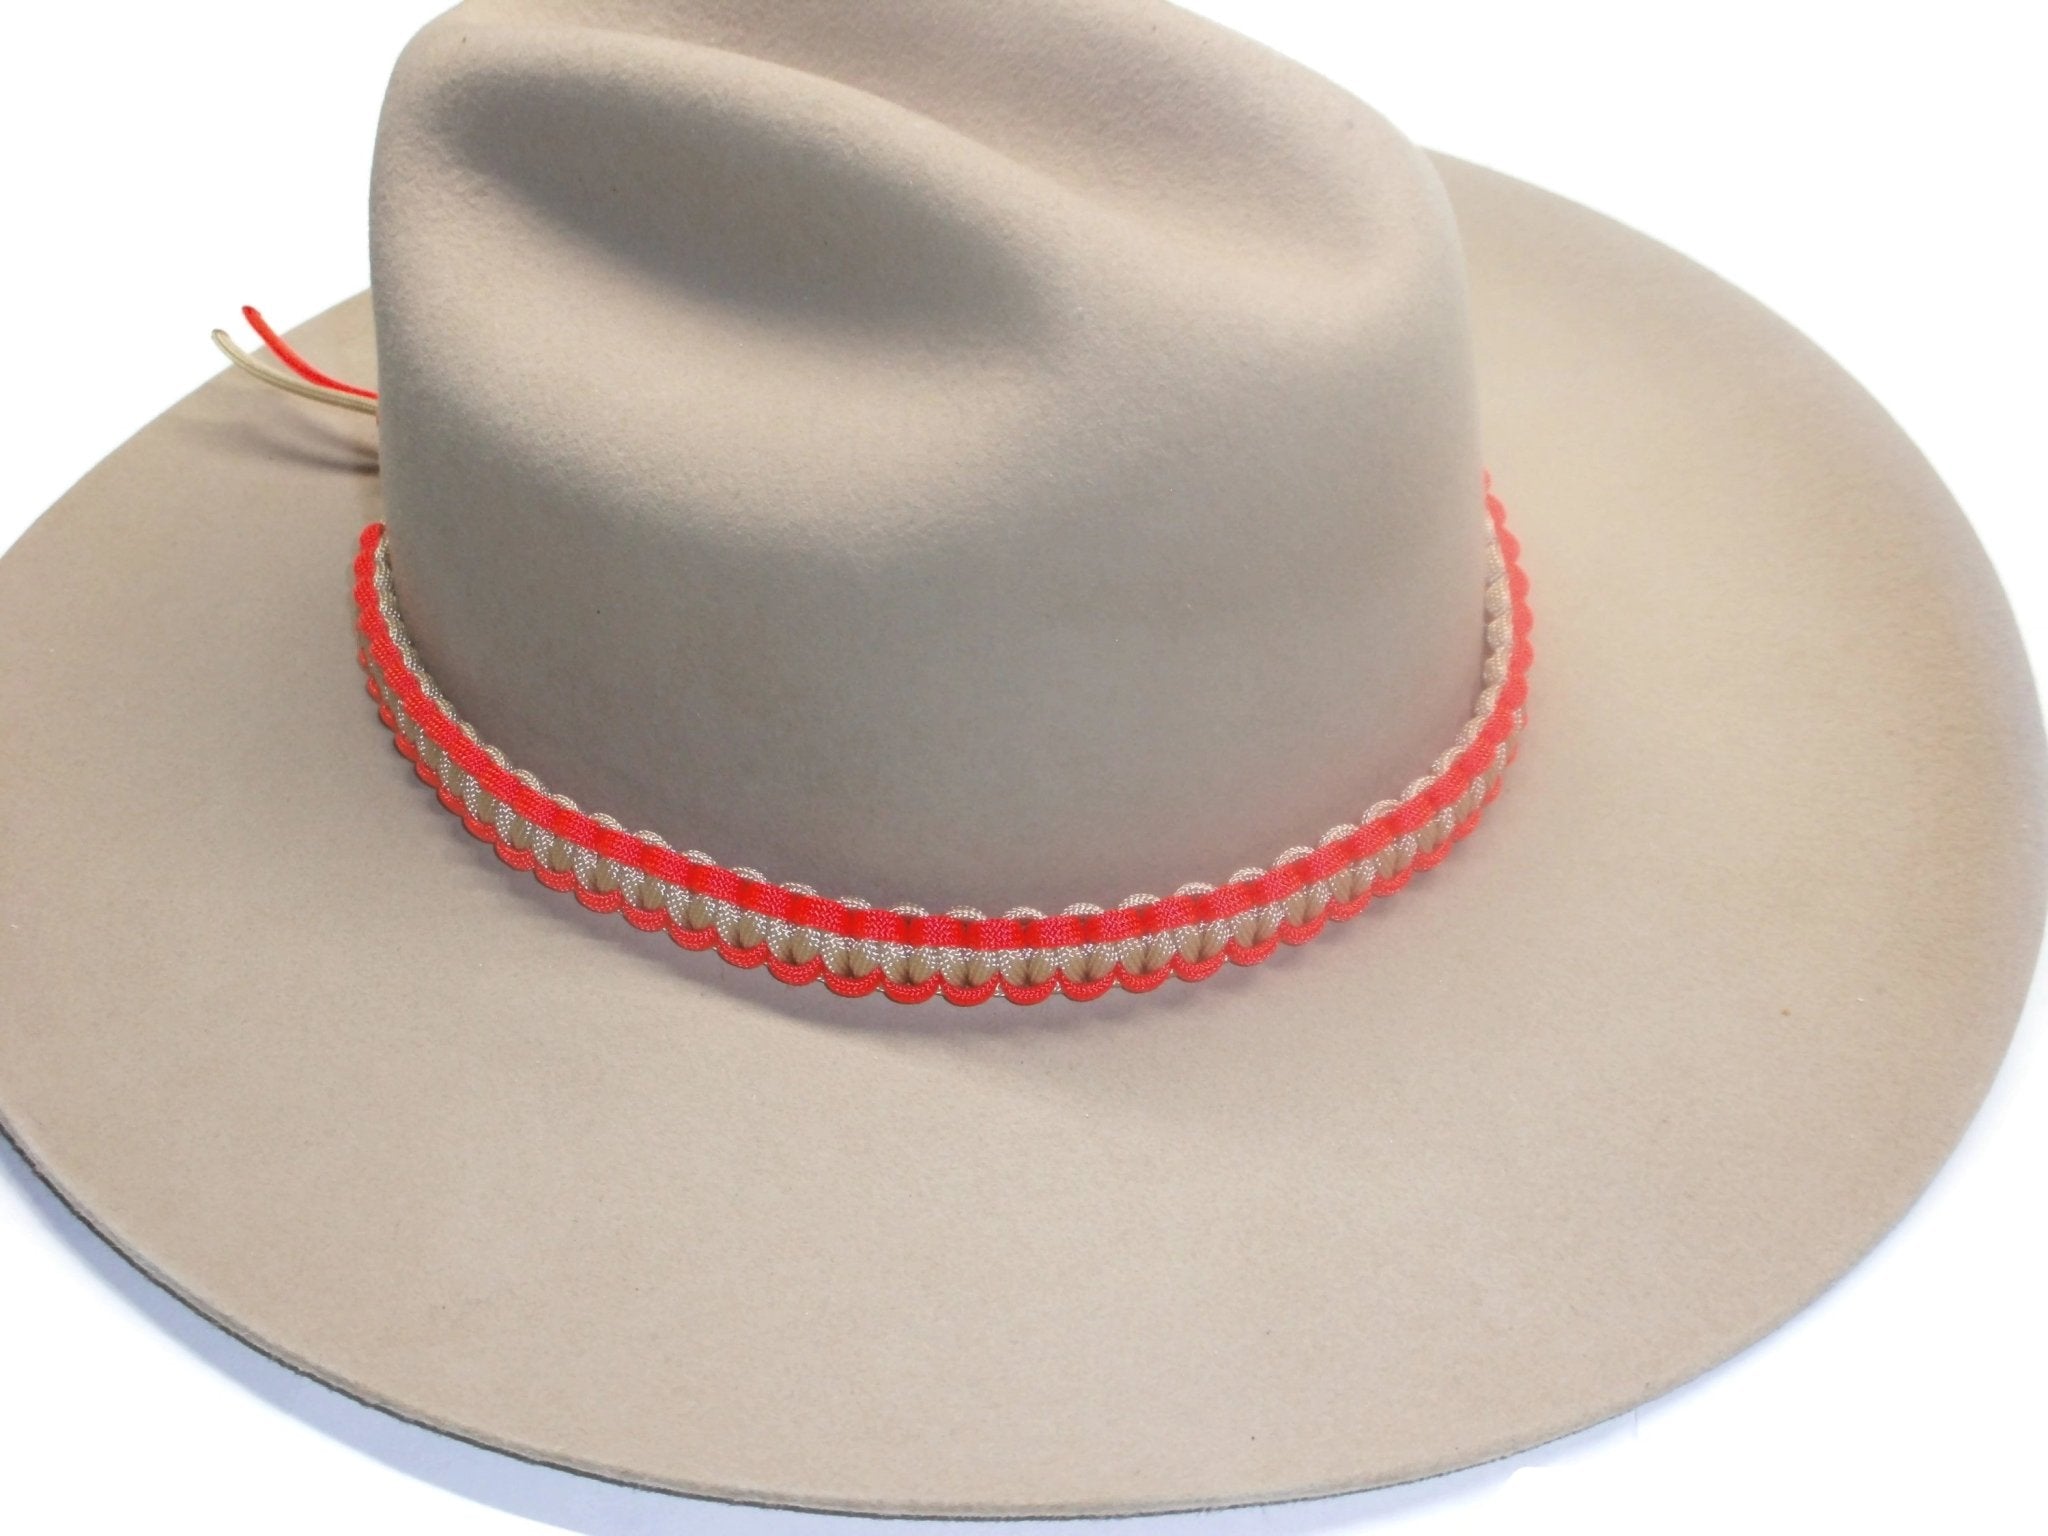 Steel Bead & Leather Cowboy Hat Band Tan